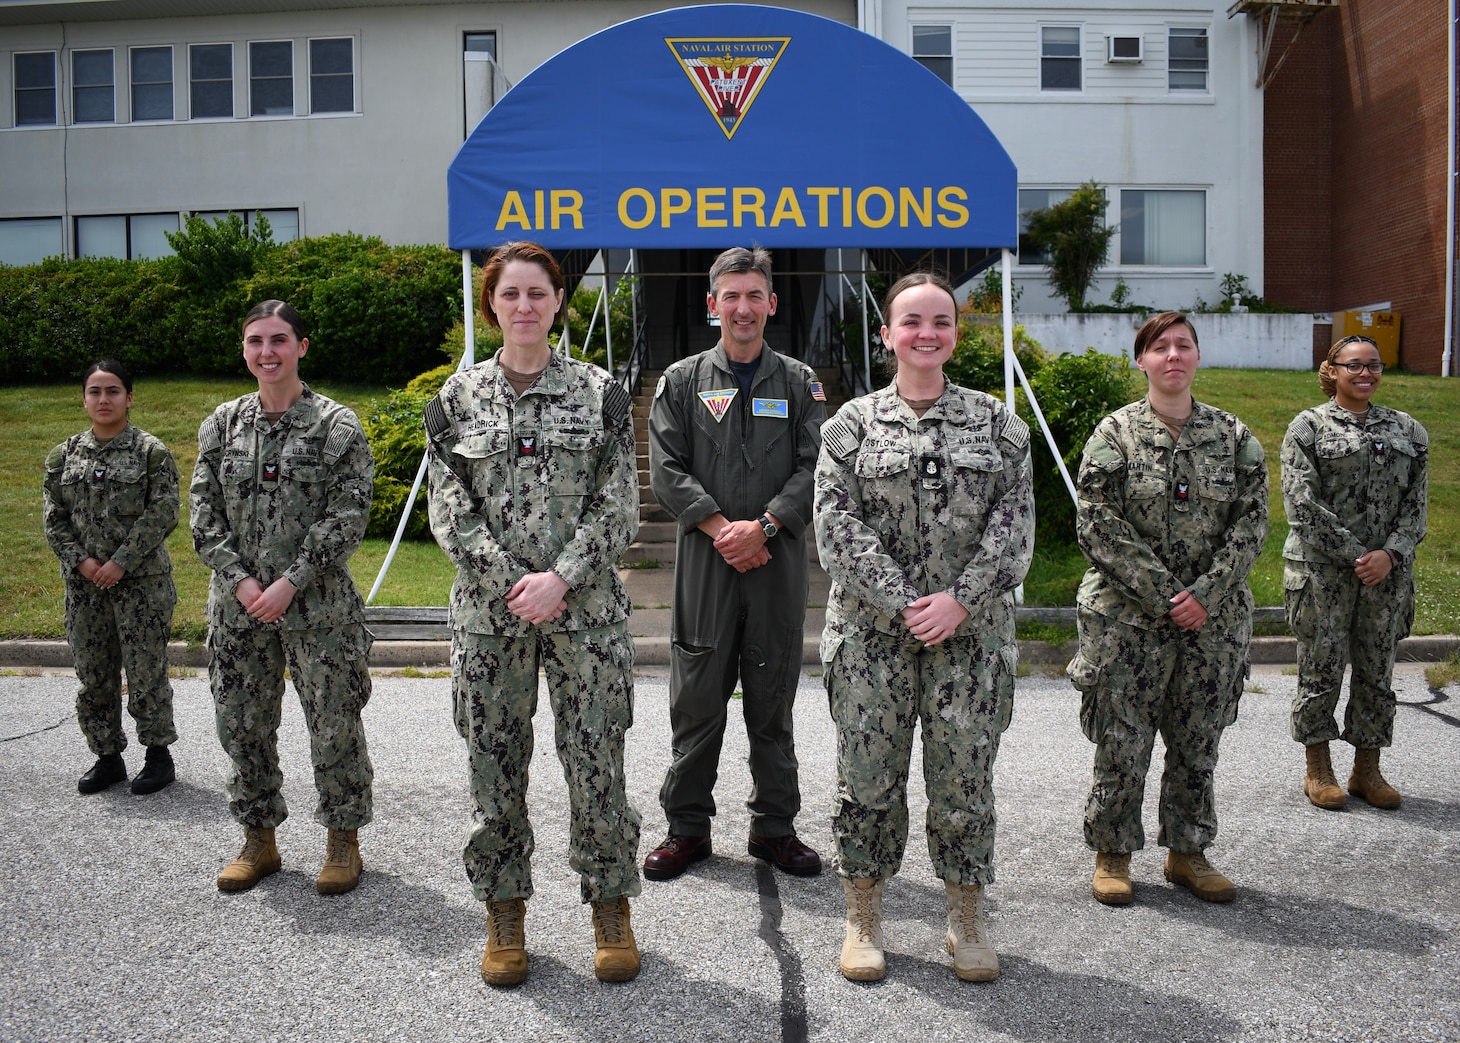 NAS Patuxent River Commanding Officer Capt. Derrick Kingsley, center, stands with members of the first all-women air traffic control crew at NAS Patuxent River May 30. From left, Air Traffic Controller 2nd Class Syrenia Cuevas, Air Traffic Controller 1st Class Kristy Lescrynski, Air Traffic Controller 1st Class Erica Headrick, Chief Air Traffic Controller Kristen Costlow, Air Traffic Controller 1st Class Talyssa Martin, and Air Traffic Controller 2nd Class Tieraney Edmond were all members of this historic team, which stood watches between the Pax River Air Traffic Control Tower, Flight Planning, and Radar.